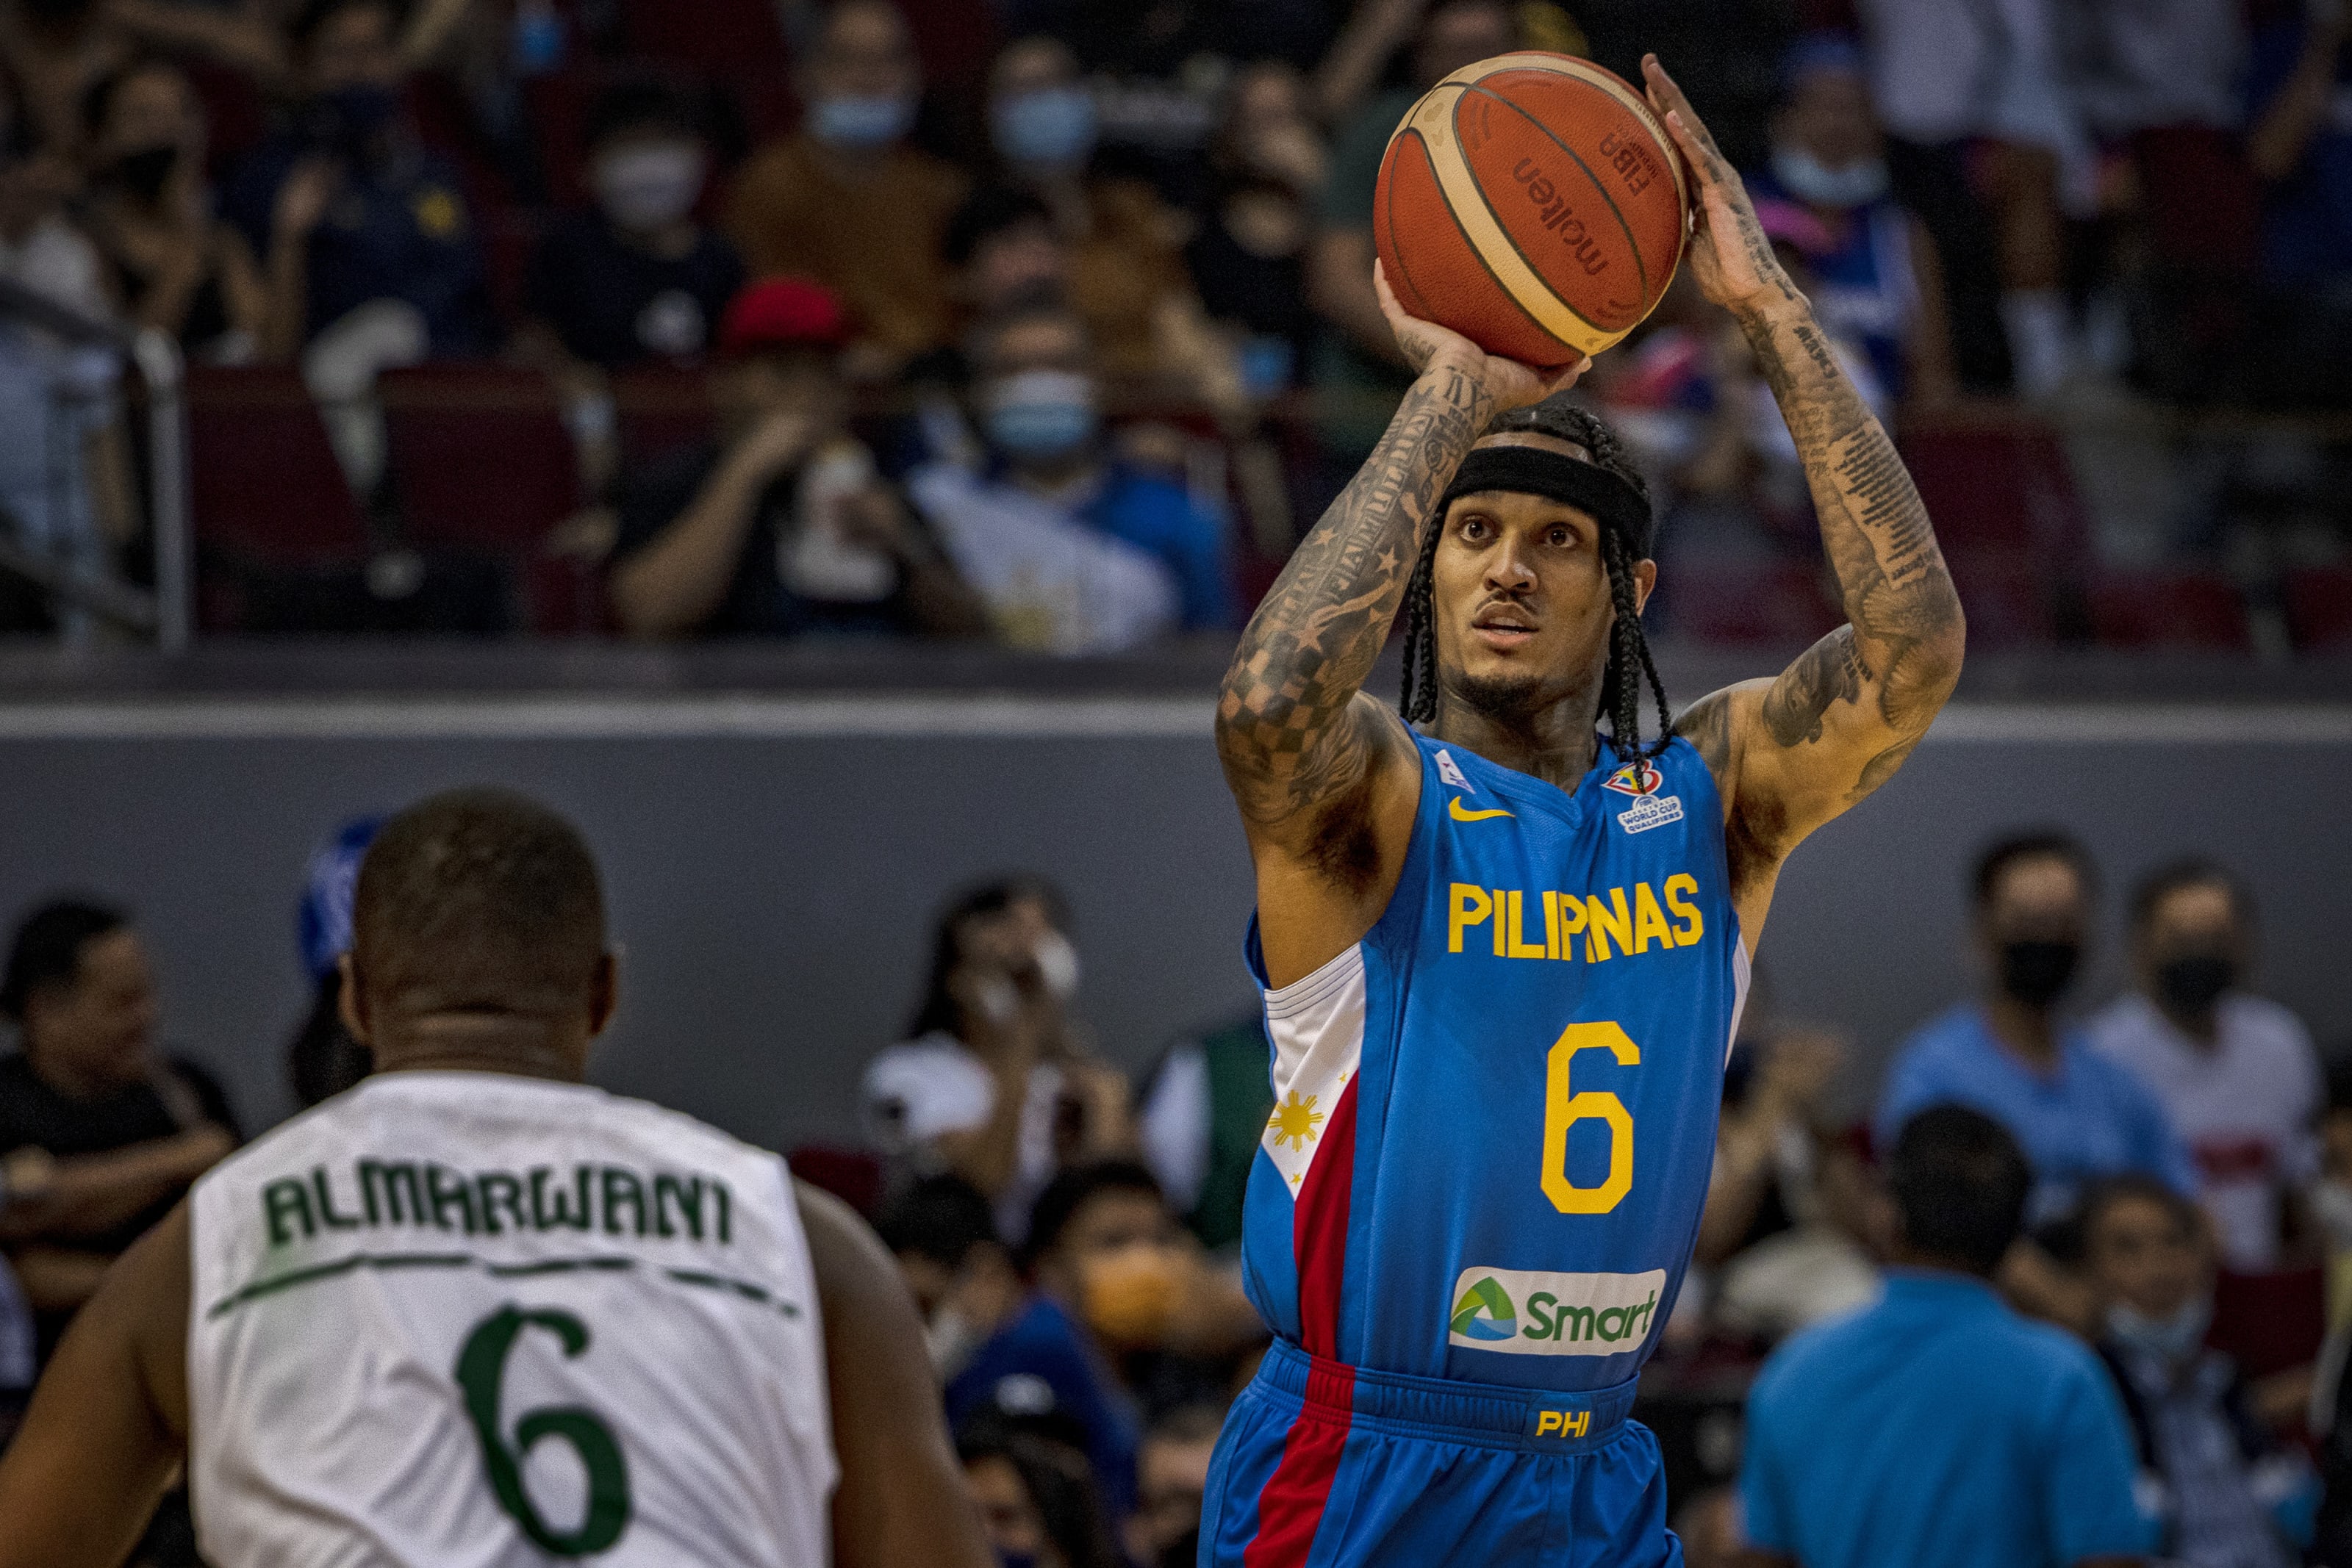 What NBA players are competing in the FIBA World Cup Qualifiers